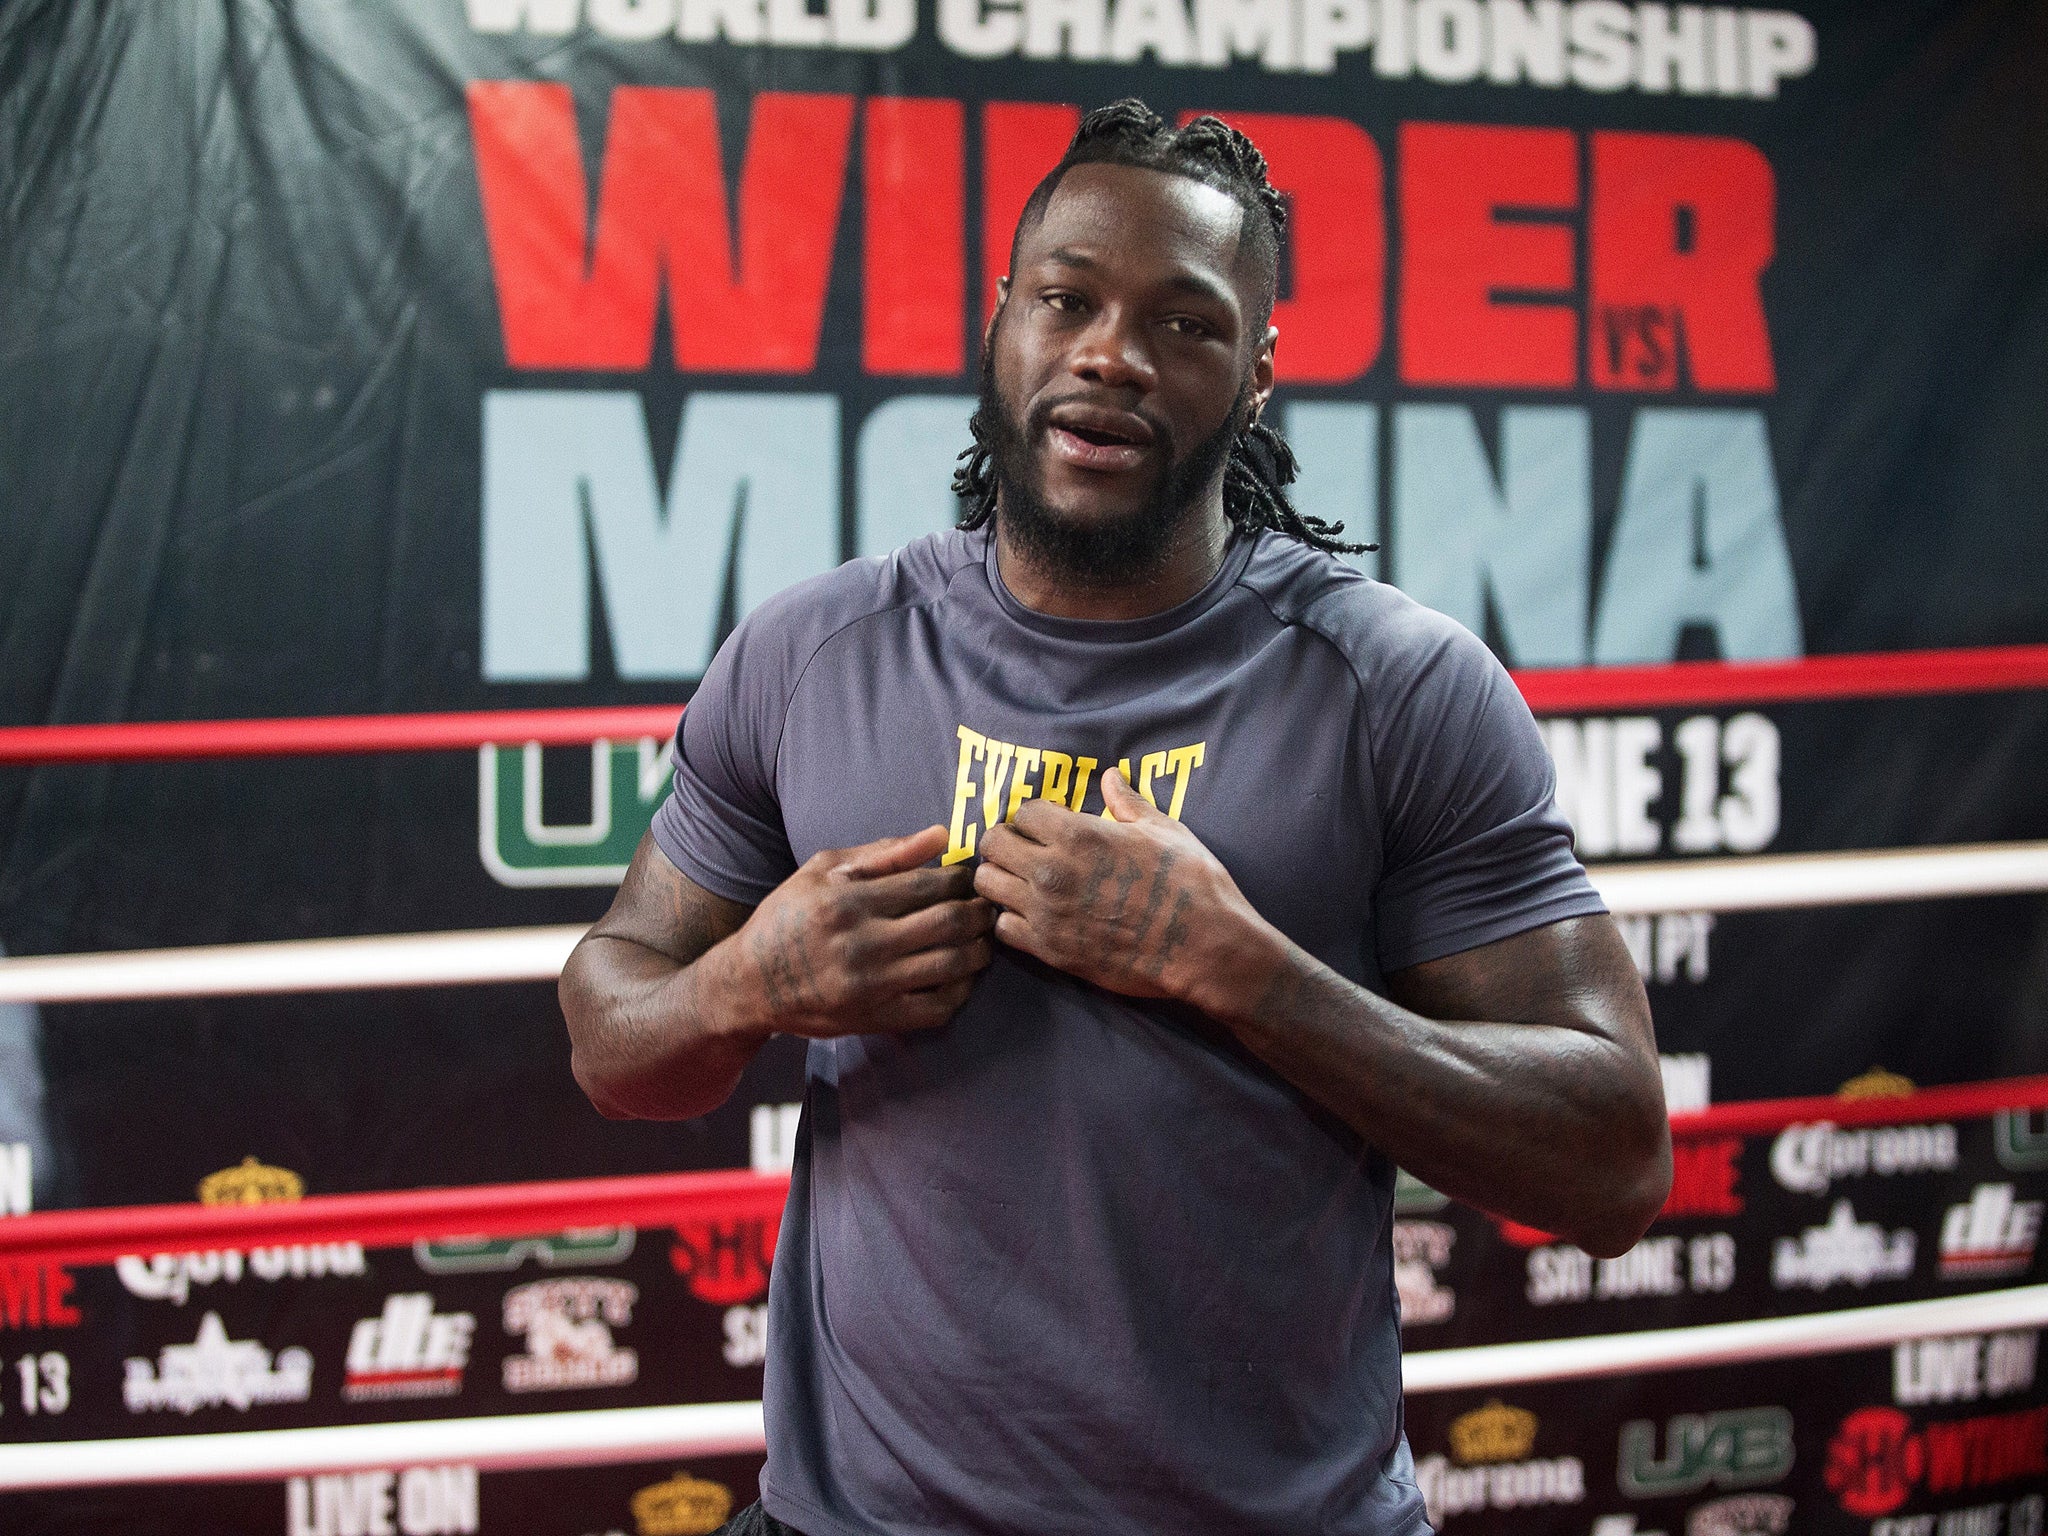 Deontay Wilder faces his sixth world title fight in two years this weekend